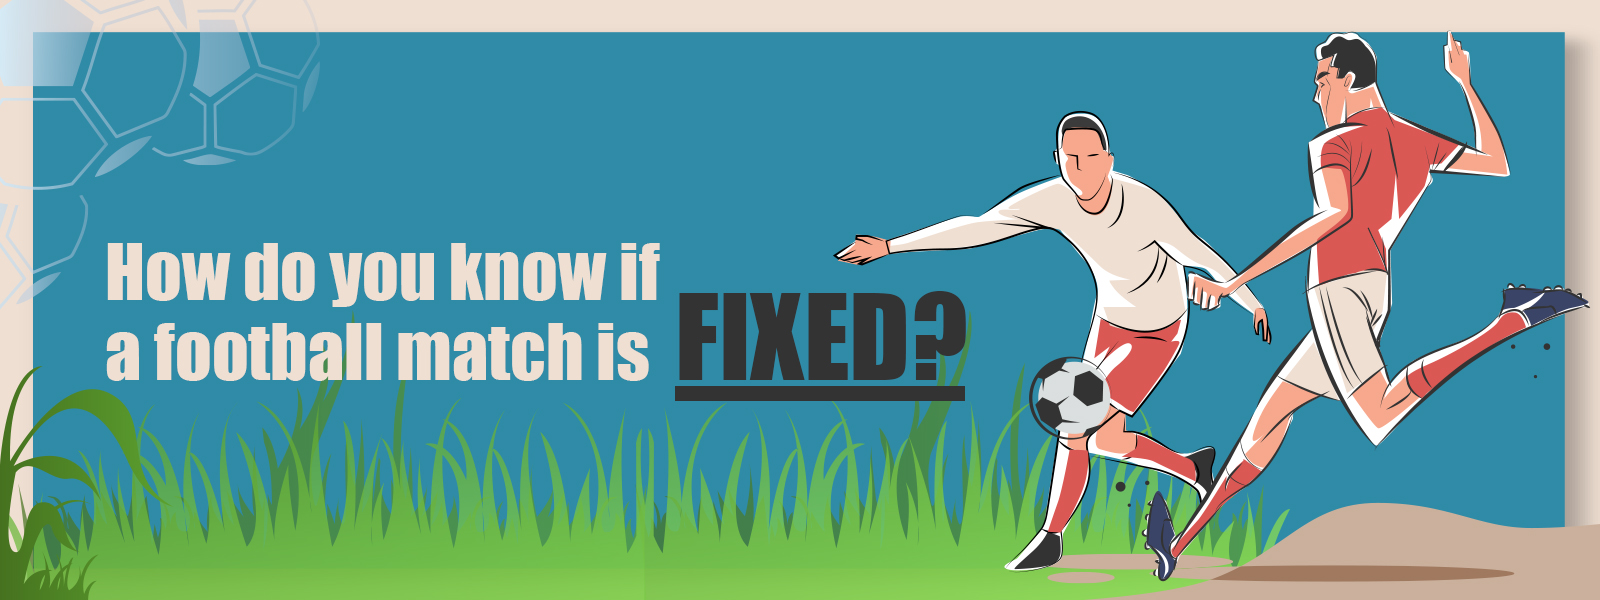 how to detect fixed match